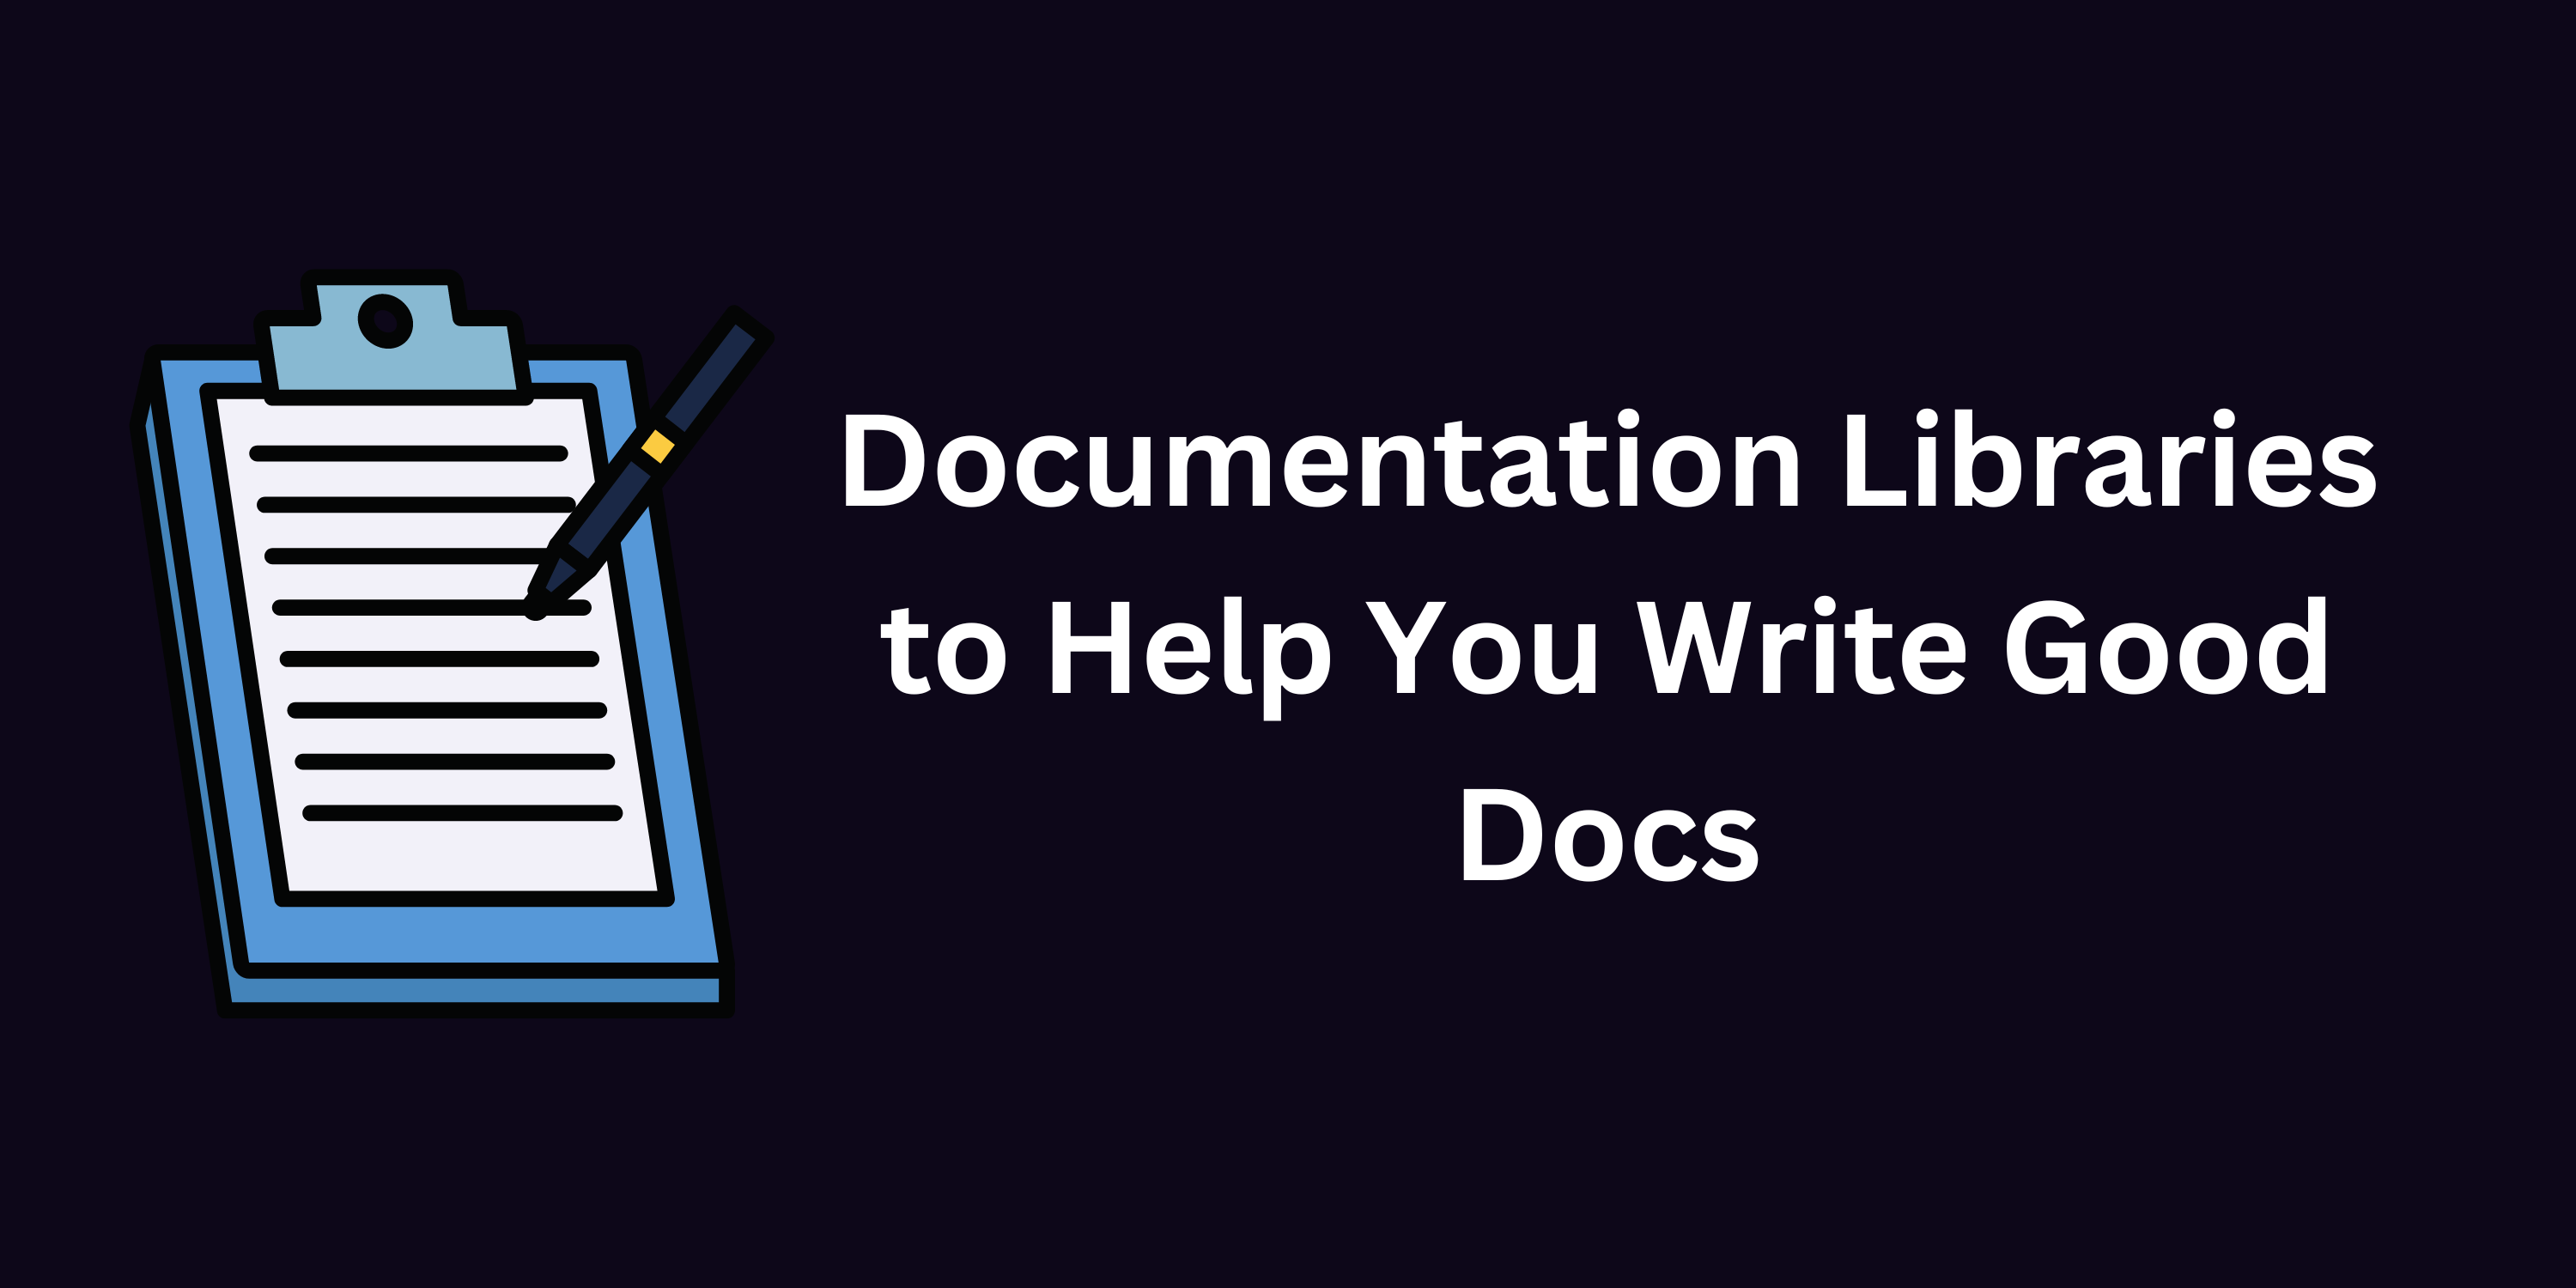 Documentation Libraries to Help You Write Good Docs